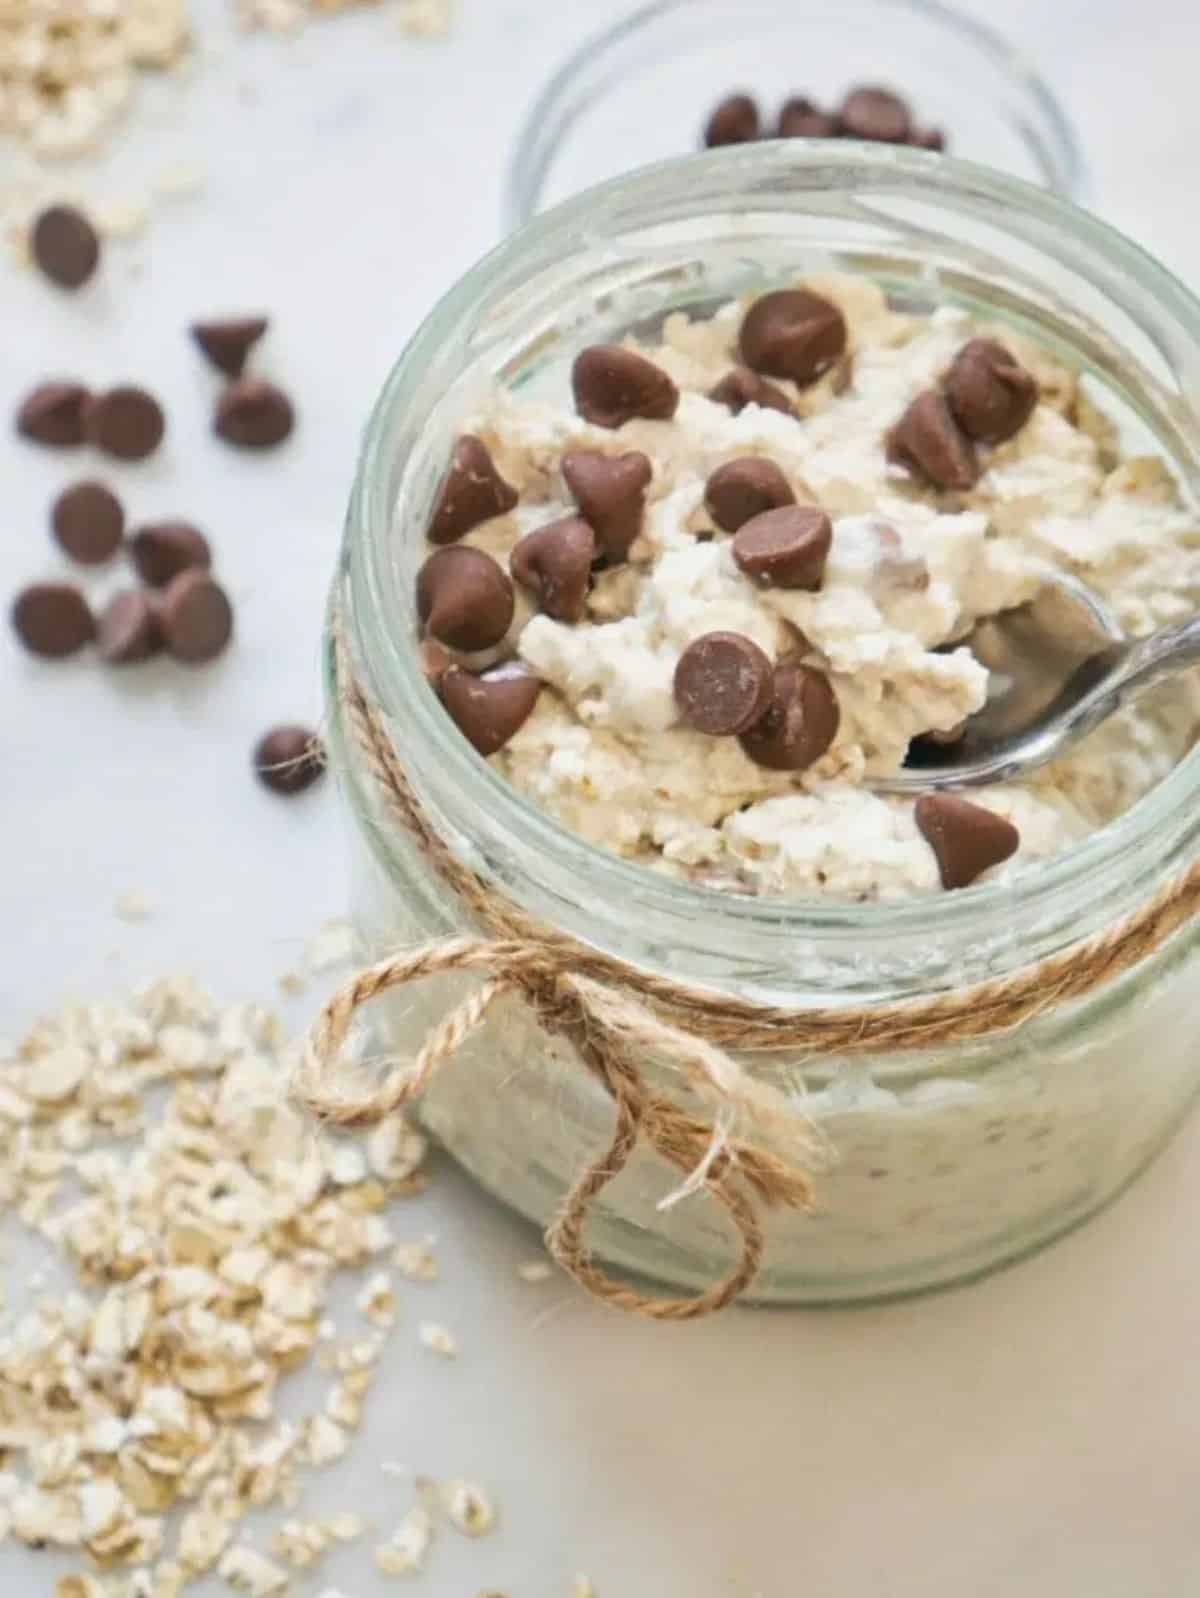 Healthy chocolate chip overnight oats in a glass jar with a spoon.